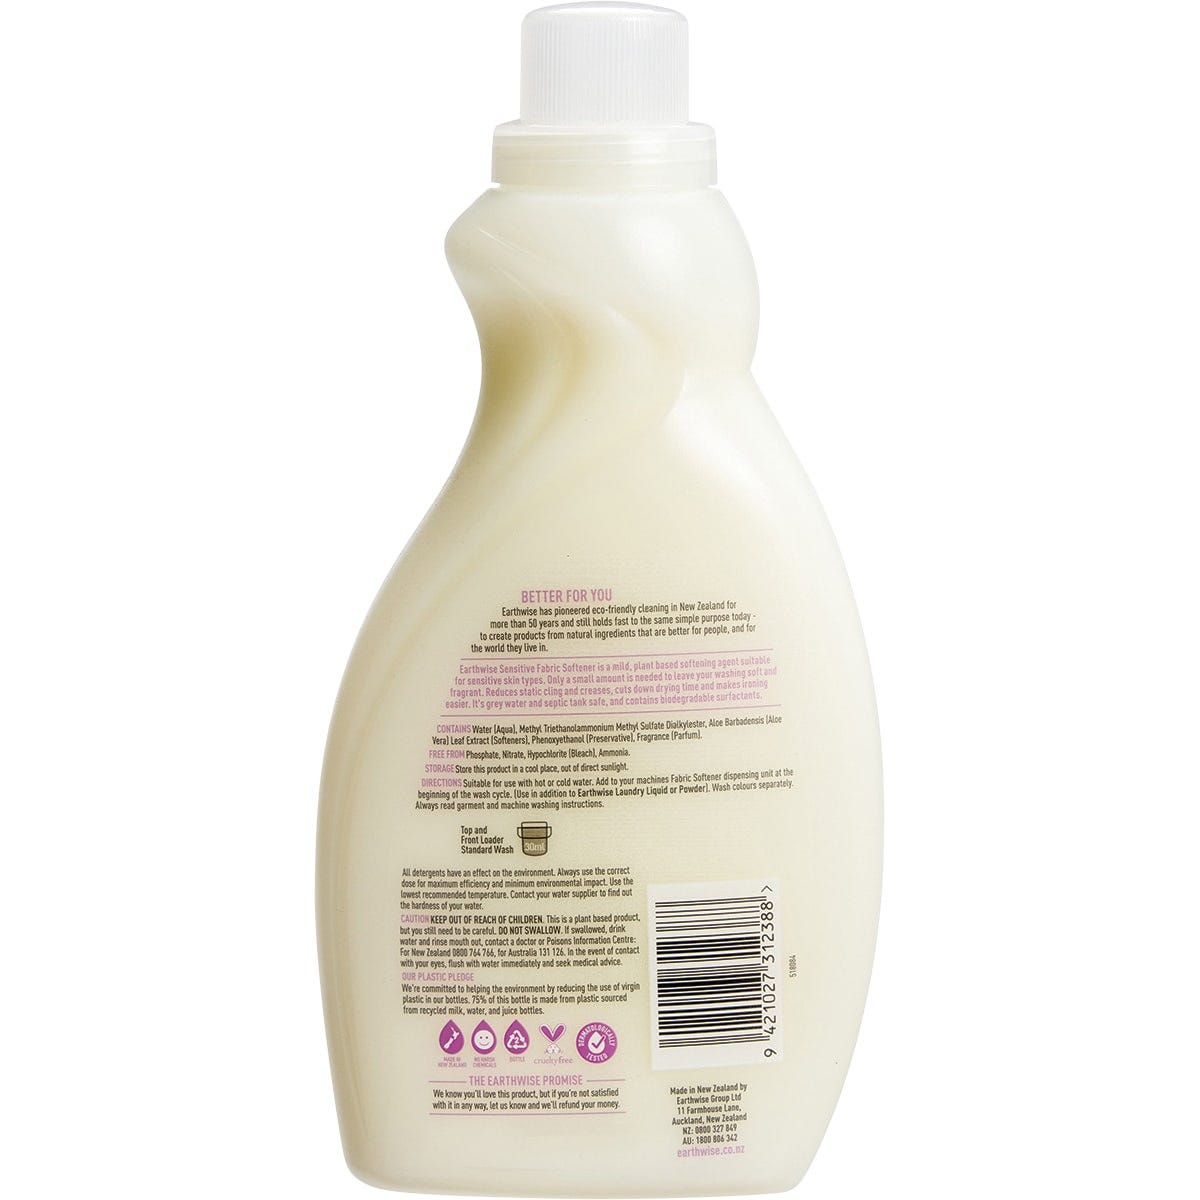 Earthwise Fabric Softener Sensitive White Lily